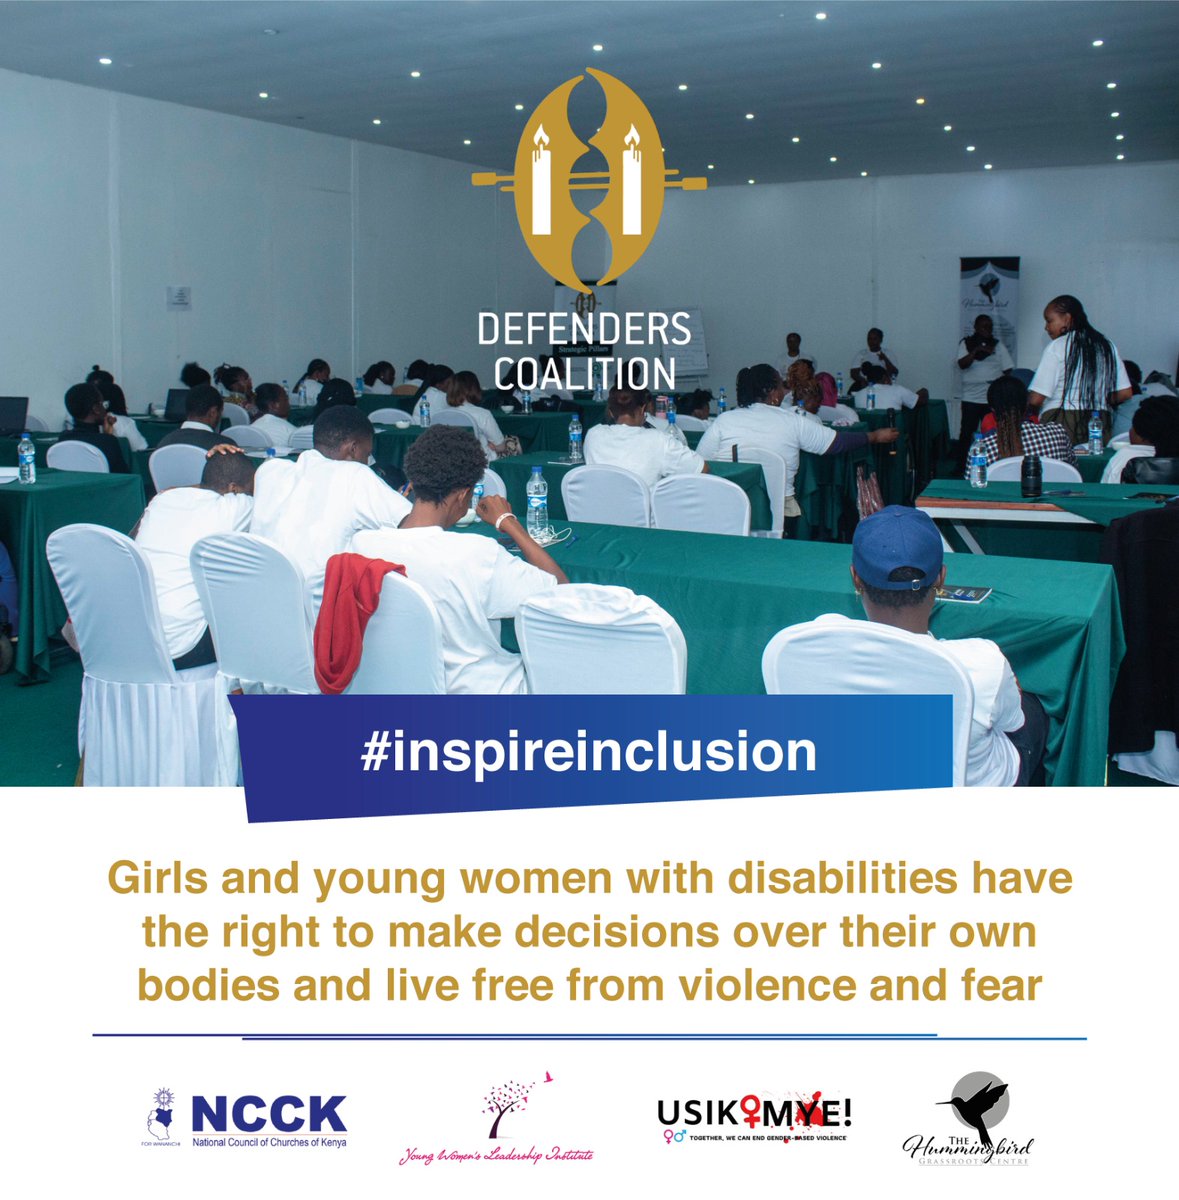 We need to appreciate and respect all persons. Irregardless of one's disability. Thus disability is not inability.
#inspireinclusion